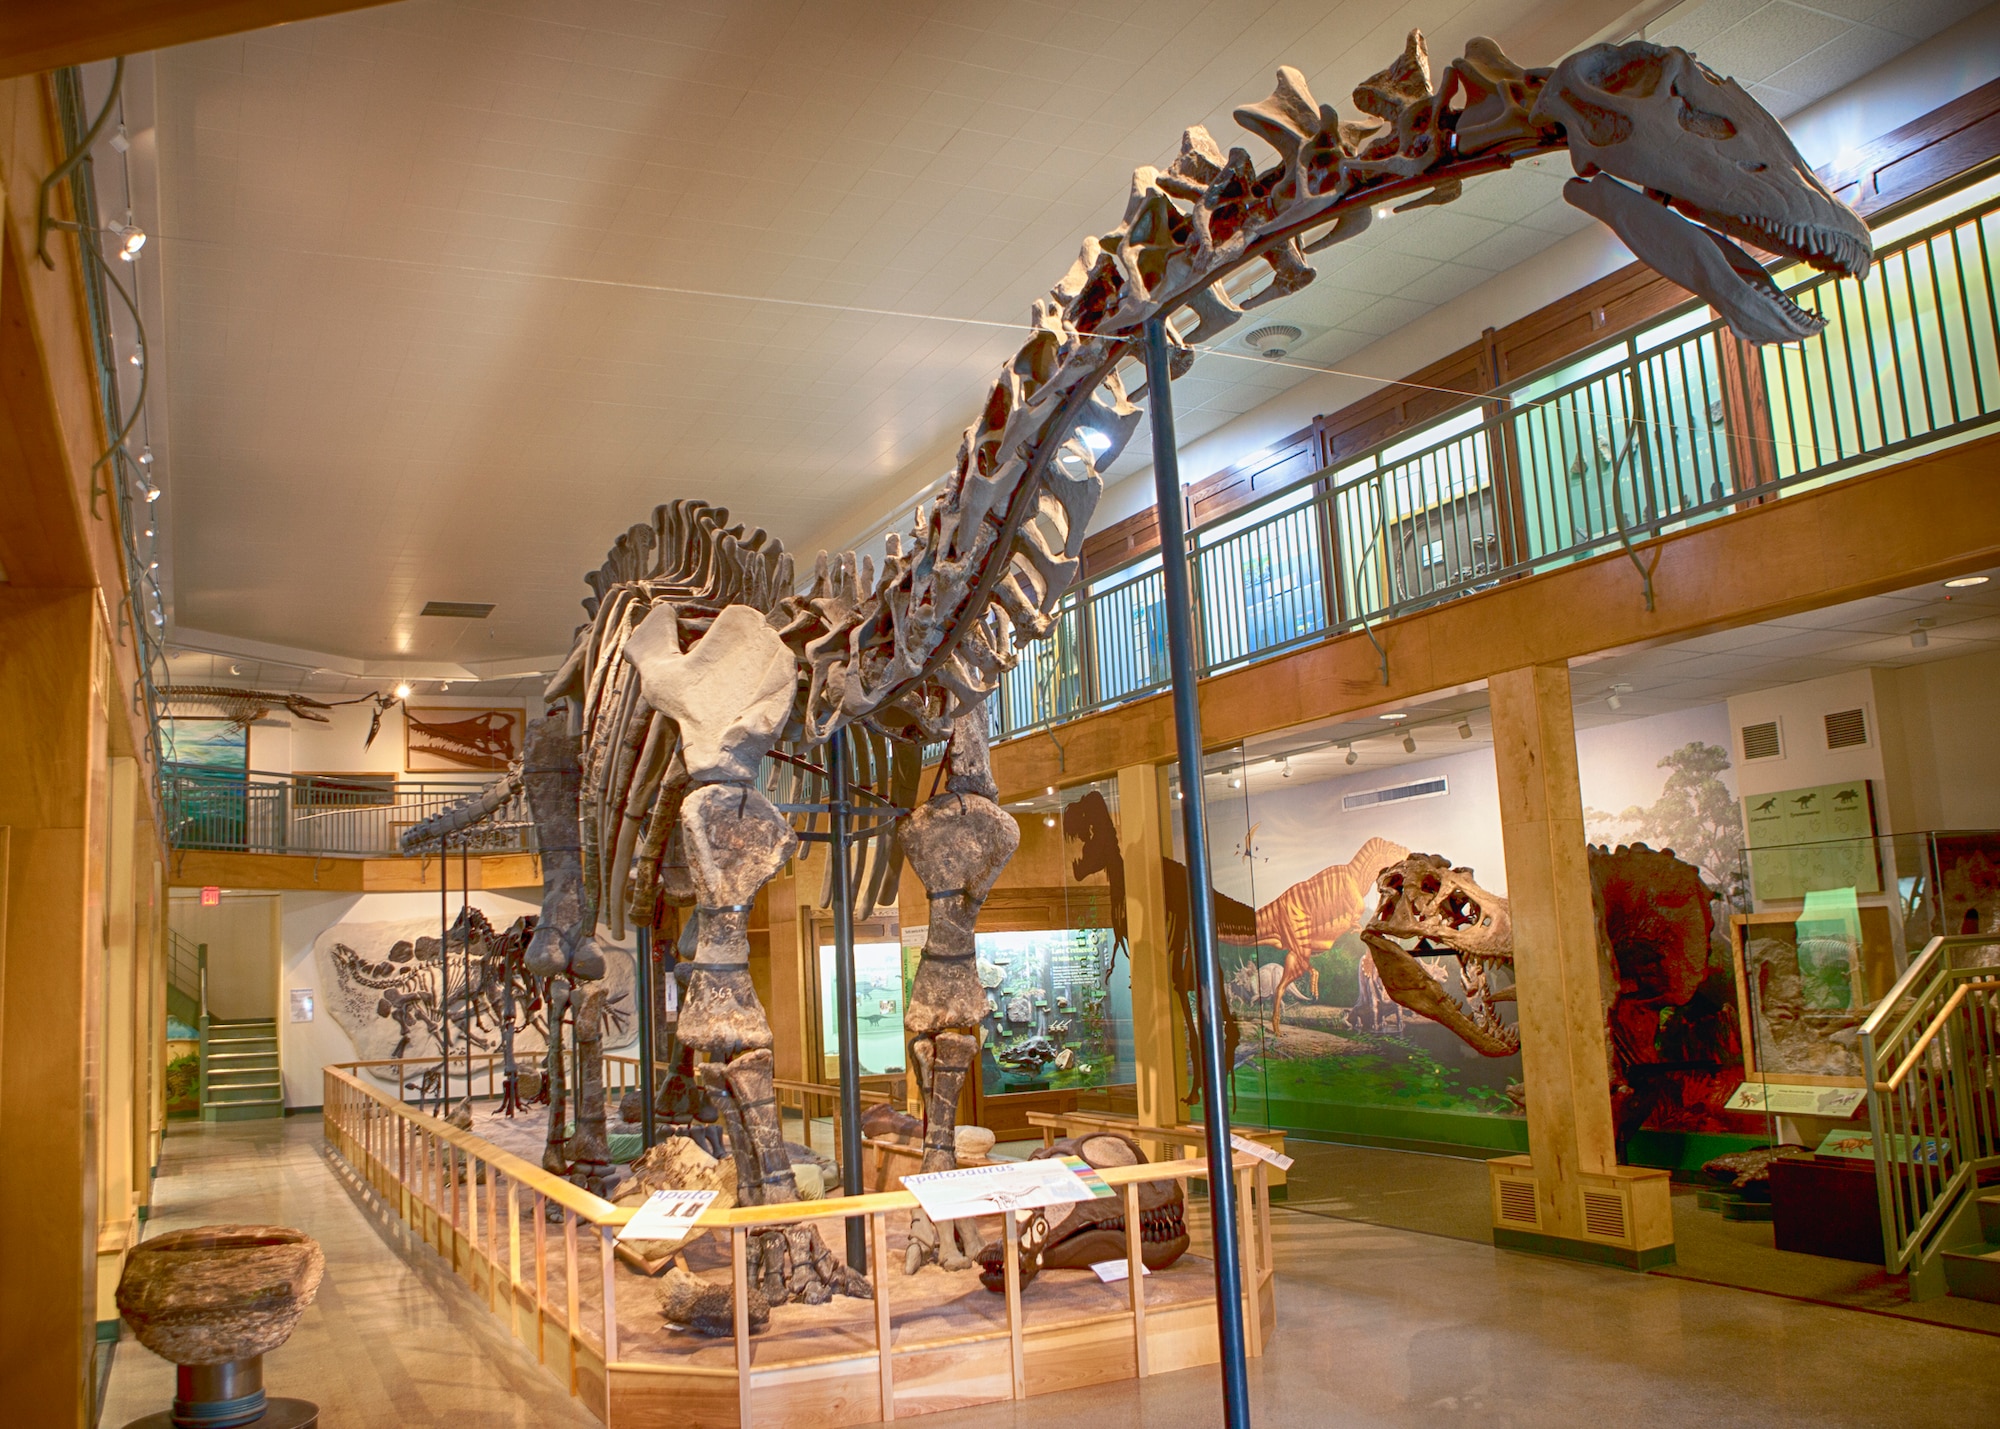 A full skeleton of an Apatosaurus greets visitors to the University of Wyoming Natural Geological Museum in Laramie, Wyo. (U.S. Air Force photo by Matt Bilden)